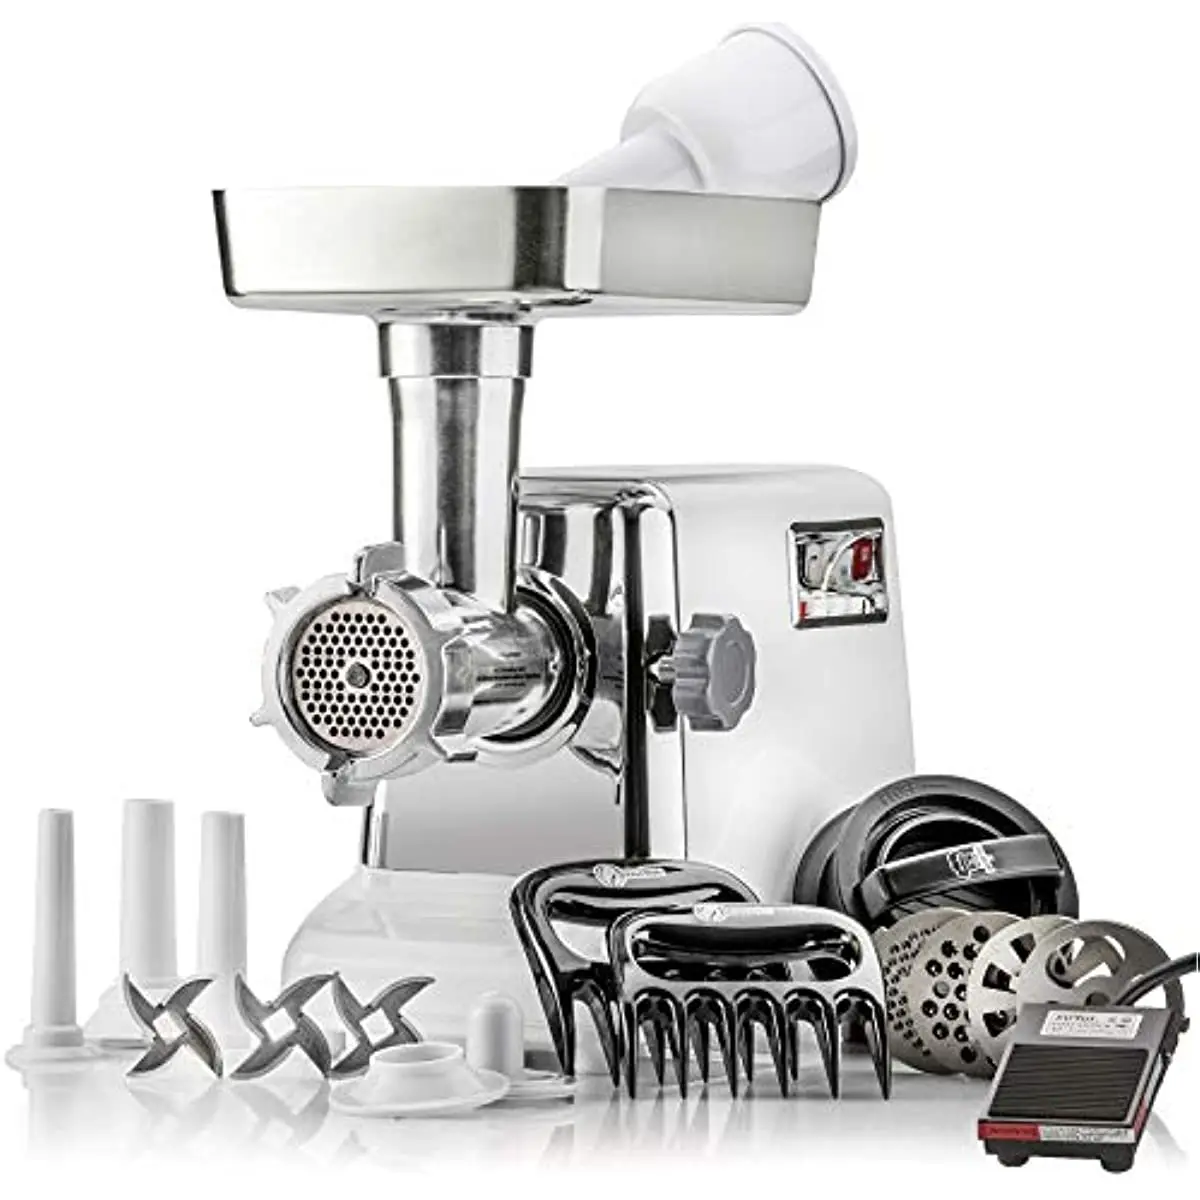 STX Turboforce 3000 Series 6-In-1 Powerful Size #12 Electric Meat Grinder with Foot Pedal • Sausage Stuffer